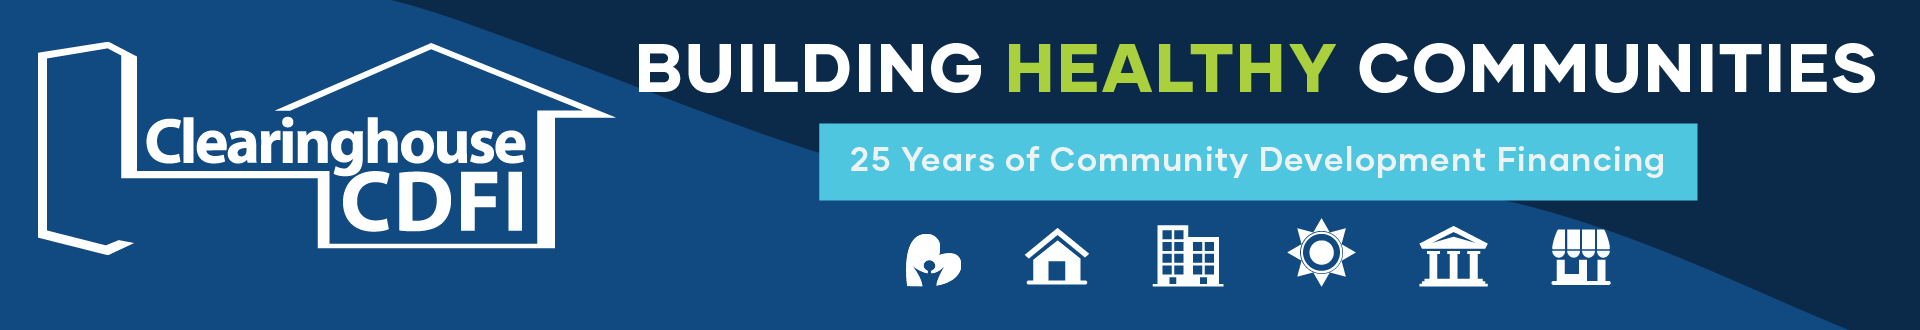 Clearinghouse CDFI: Building Healthy Communities